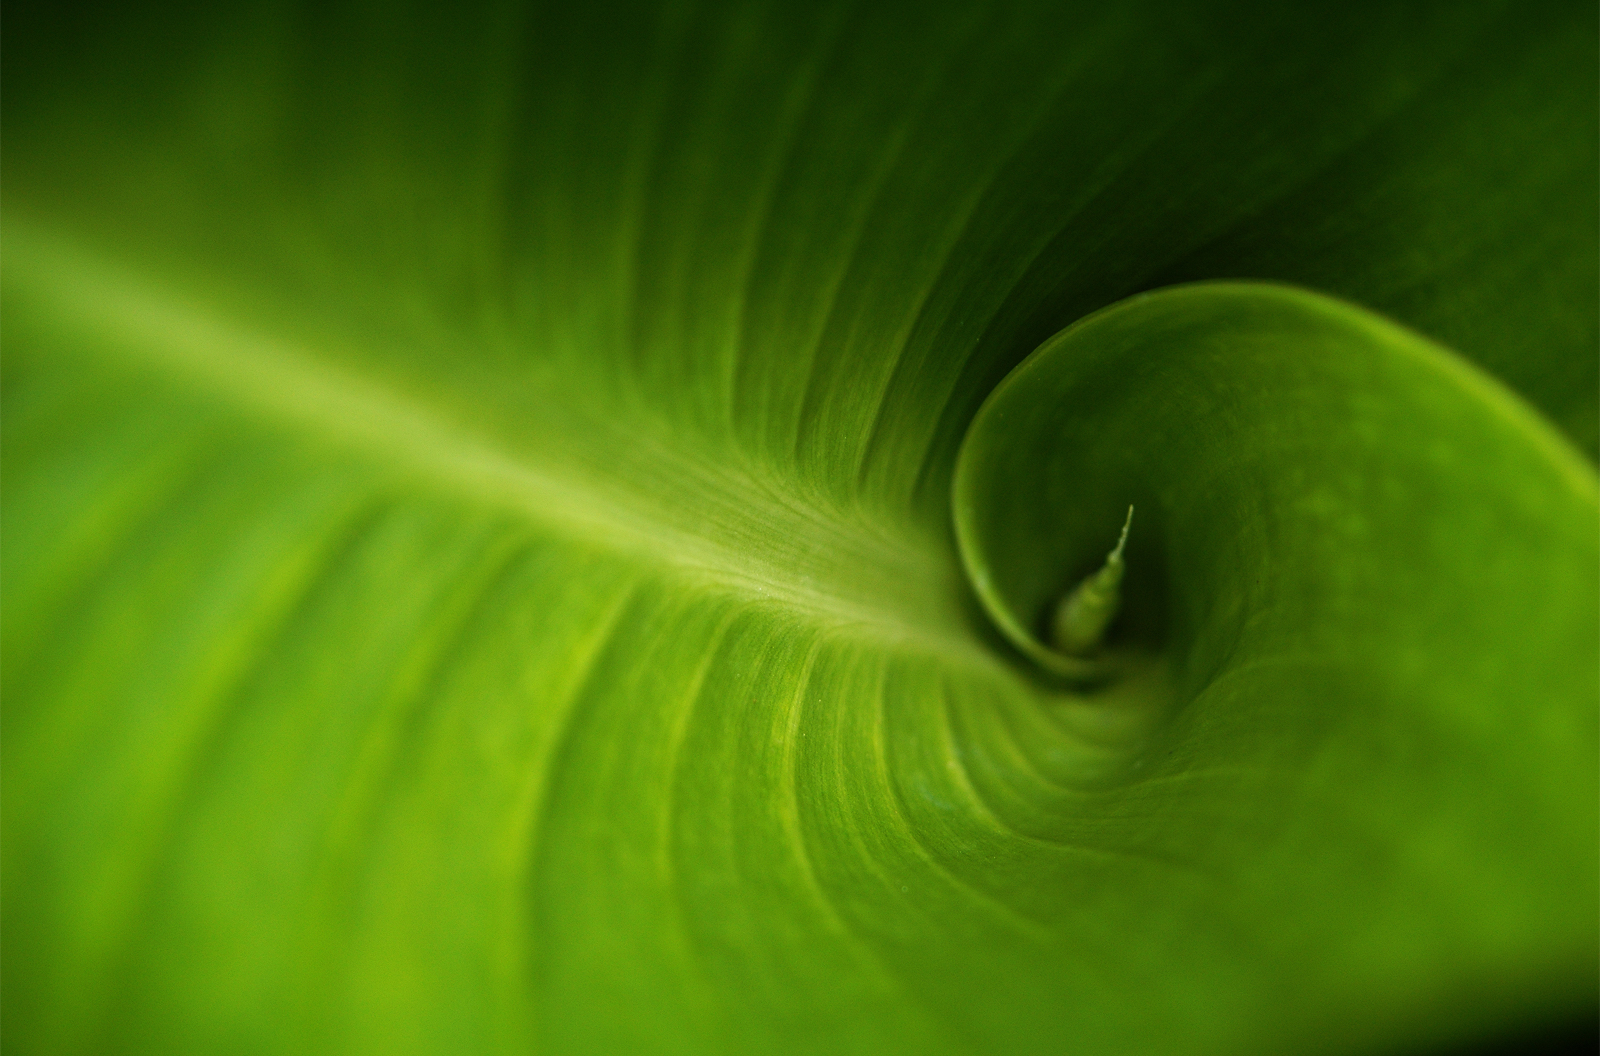 Macro photograph of green leaf in a spiral shape to illustrate the Fibonacci Spiral in nature